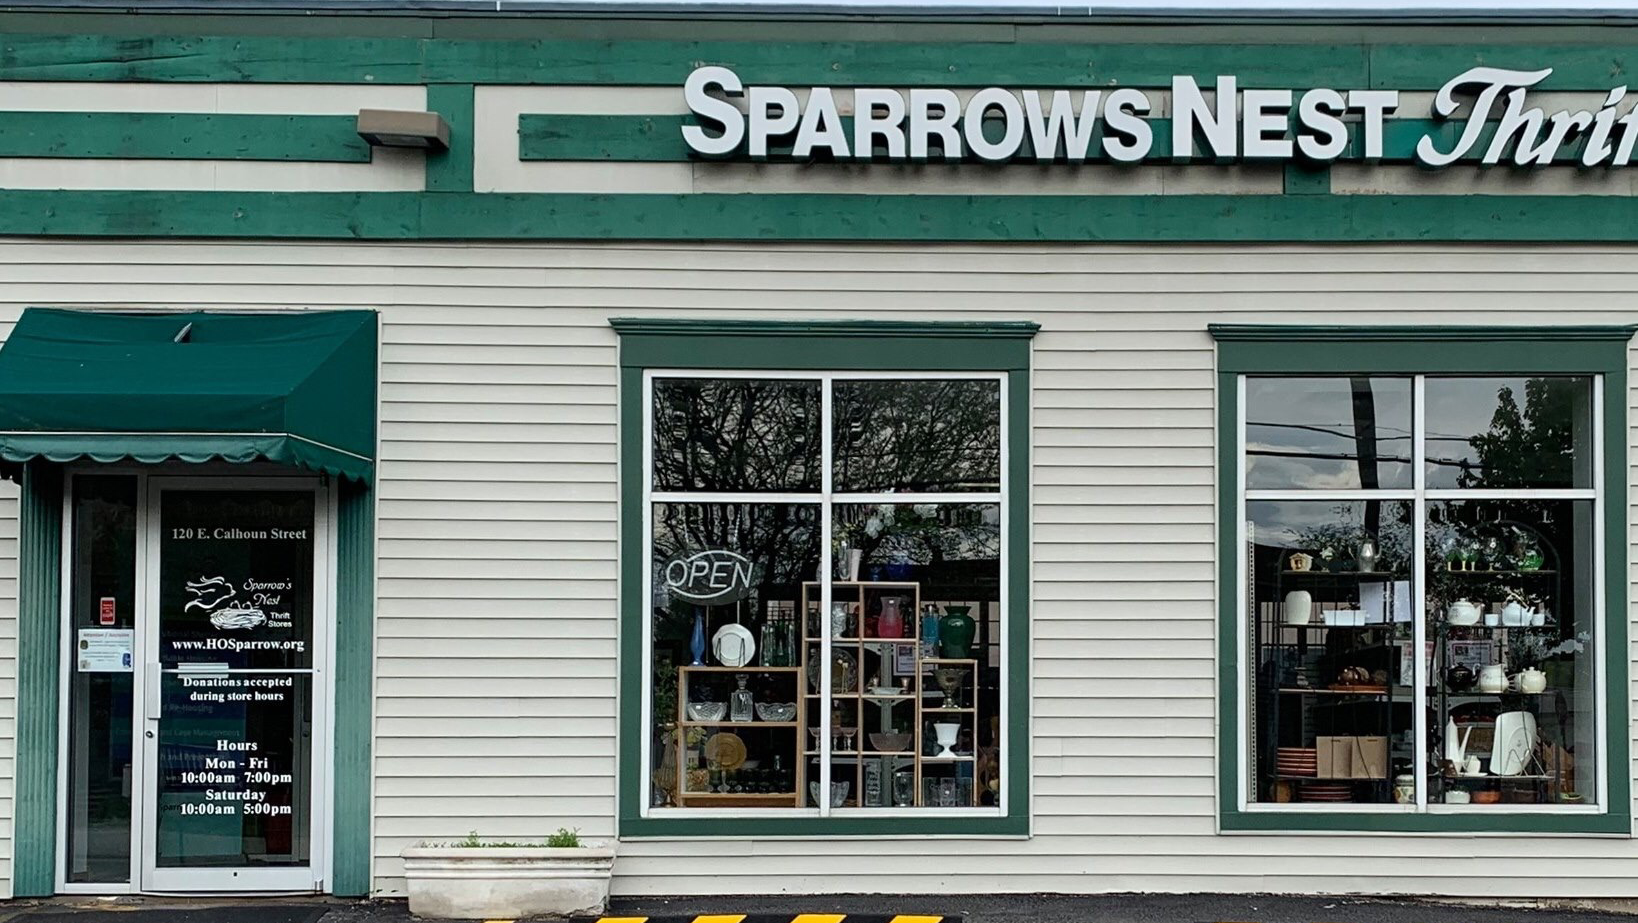 Sparrow's Nest Thrift Store and Donation Center